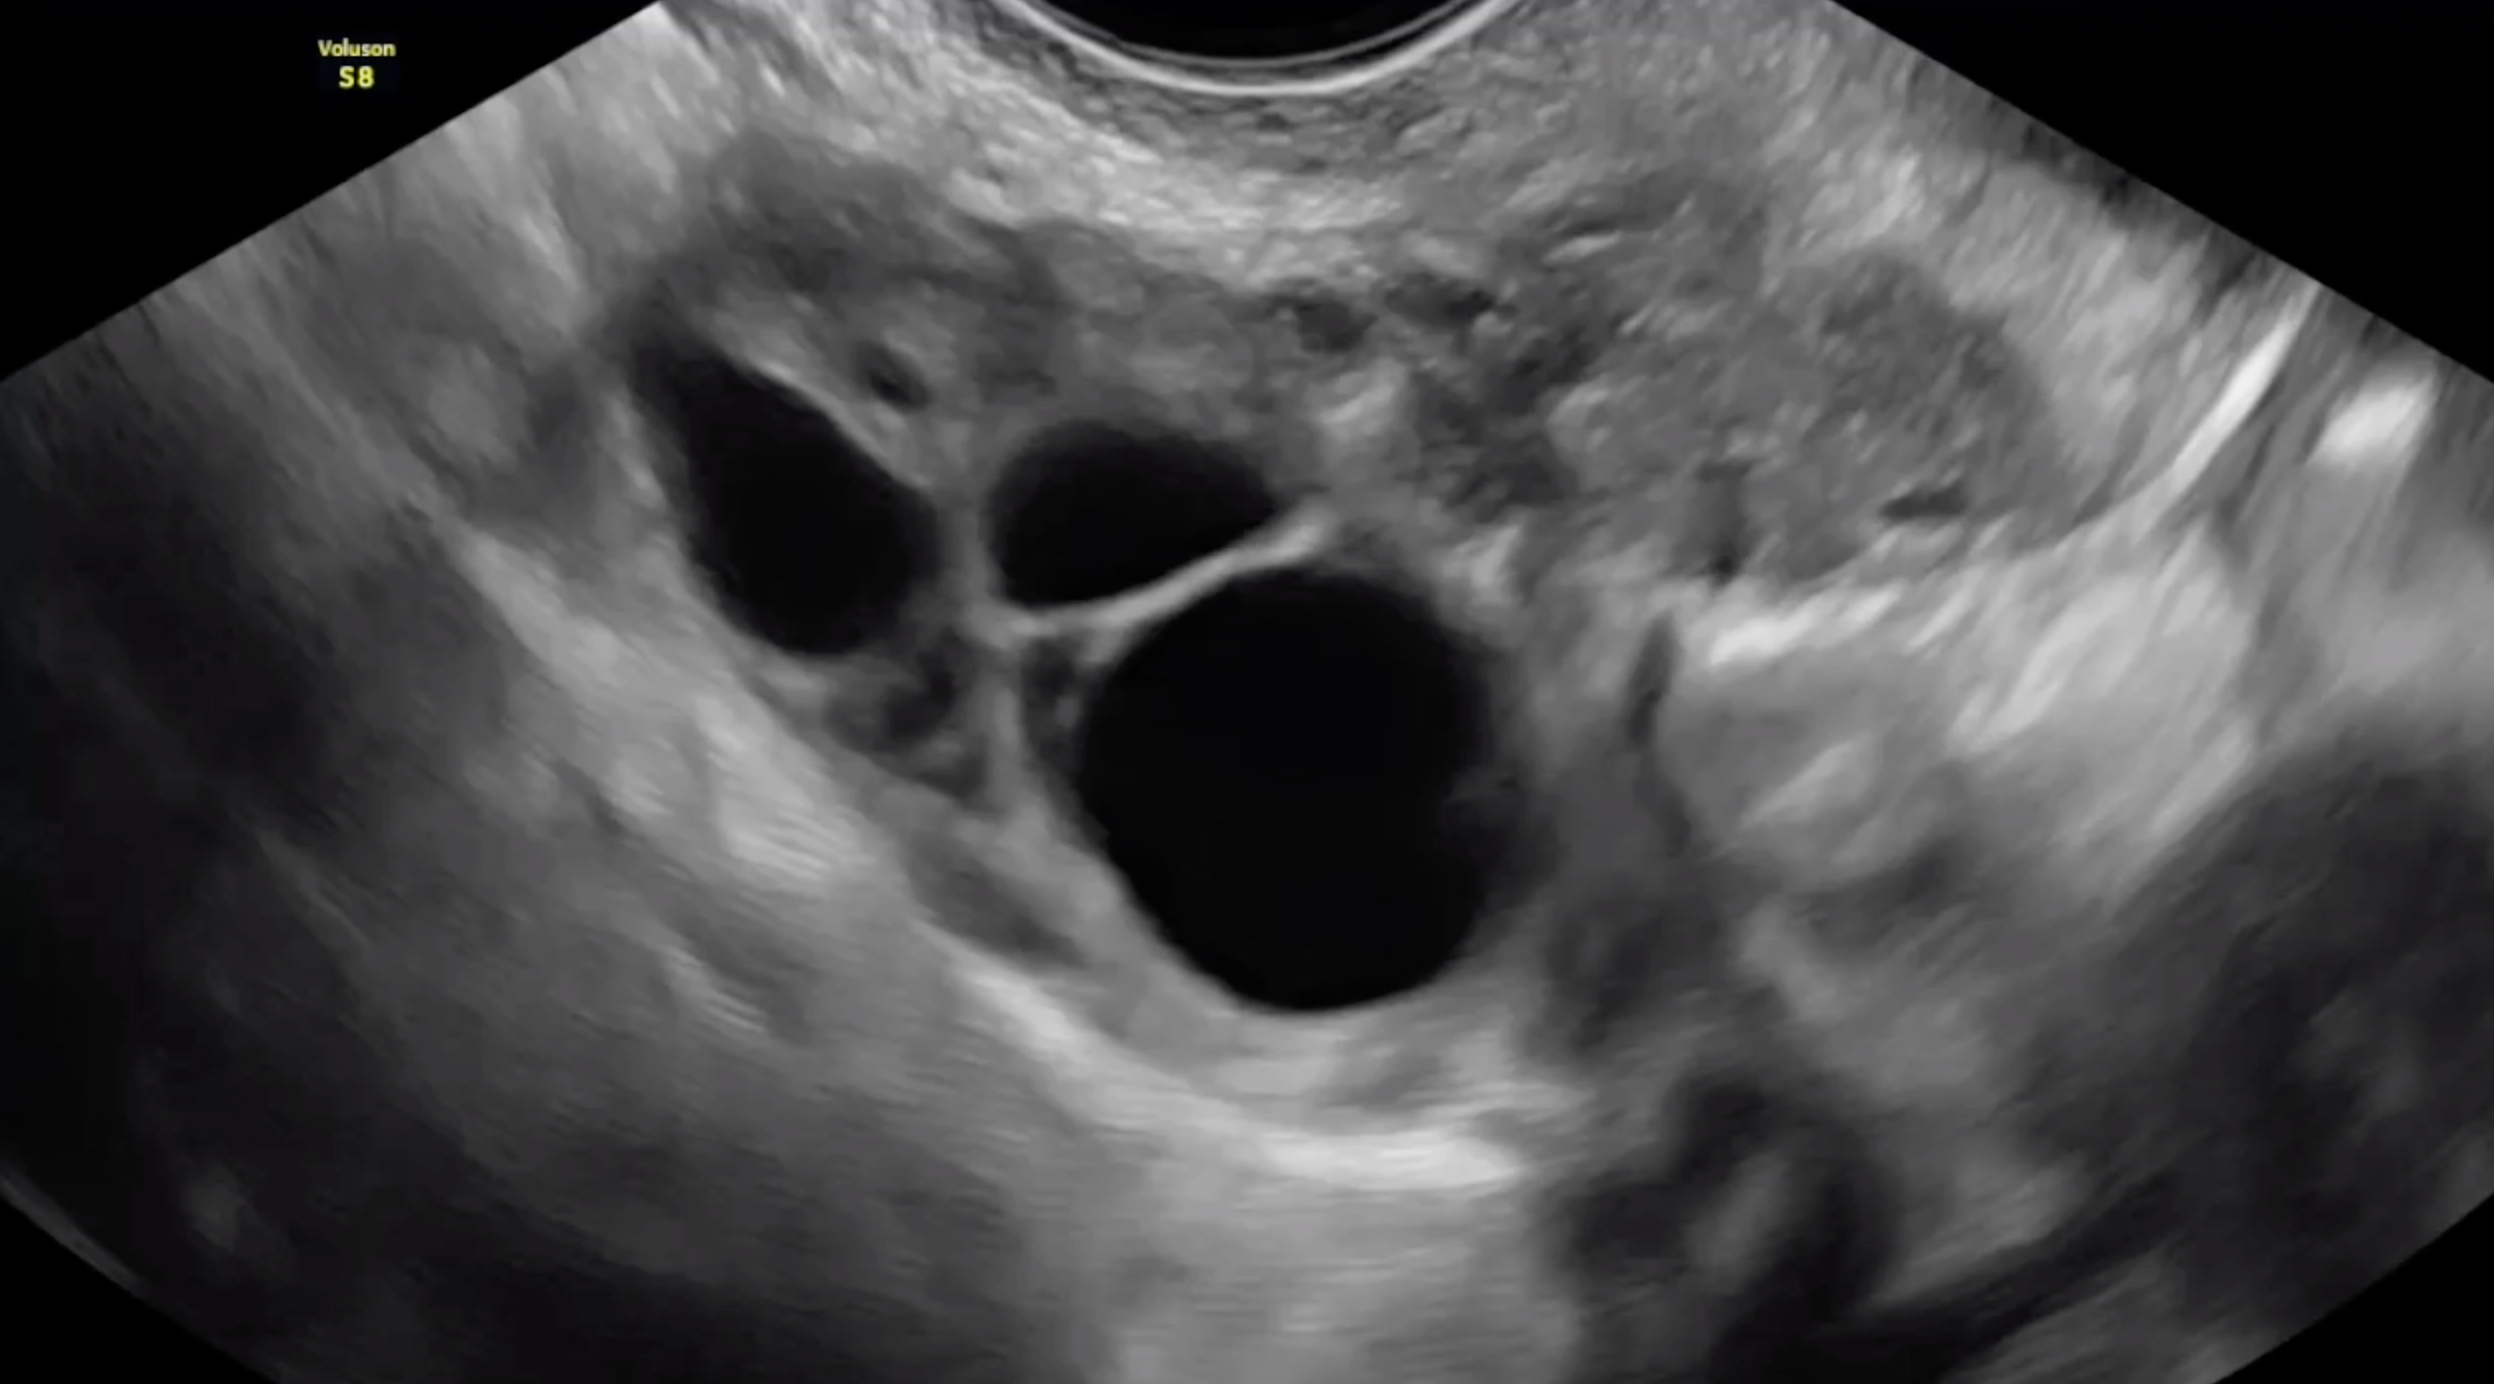 Normal ovary with circumferential mobility.